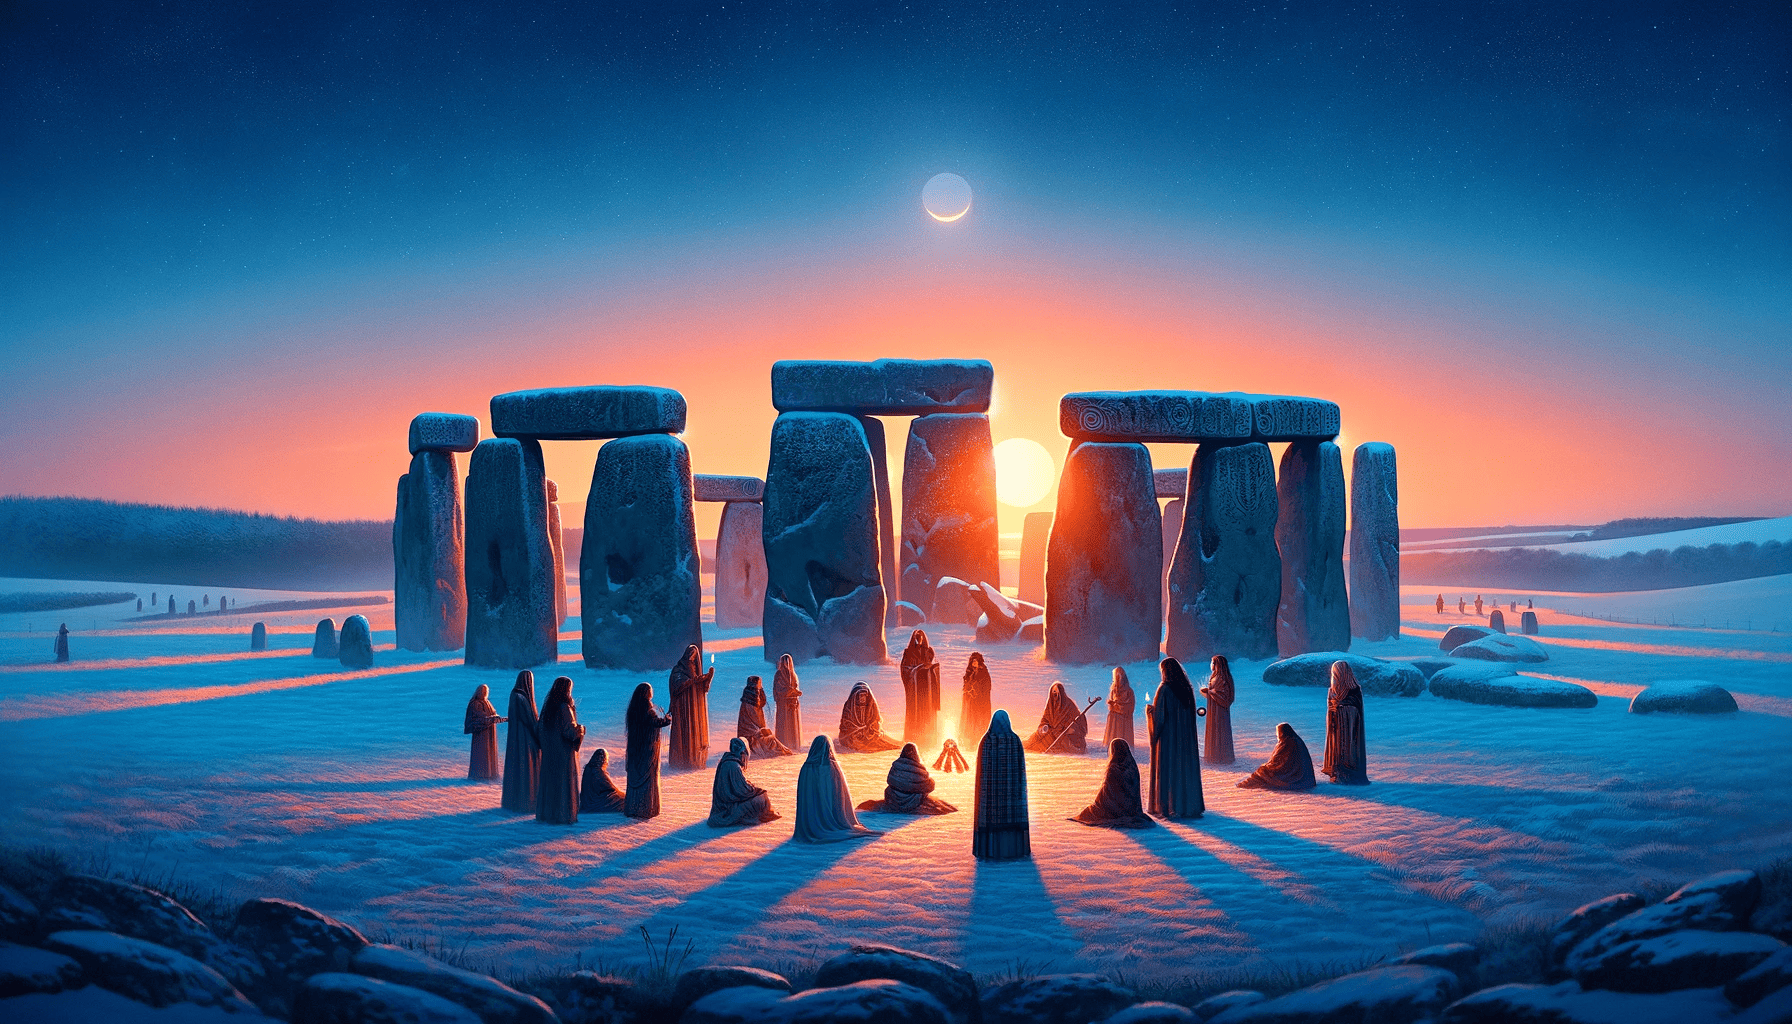 Winter Solstice Celebrations The Pagan Origins Of A Beloved Time Of